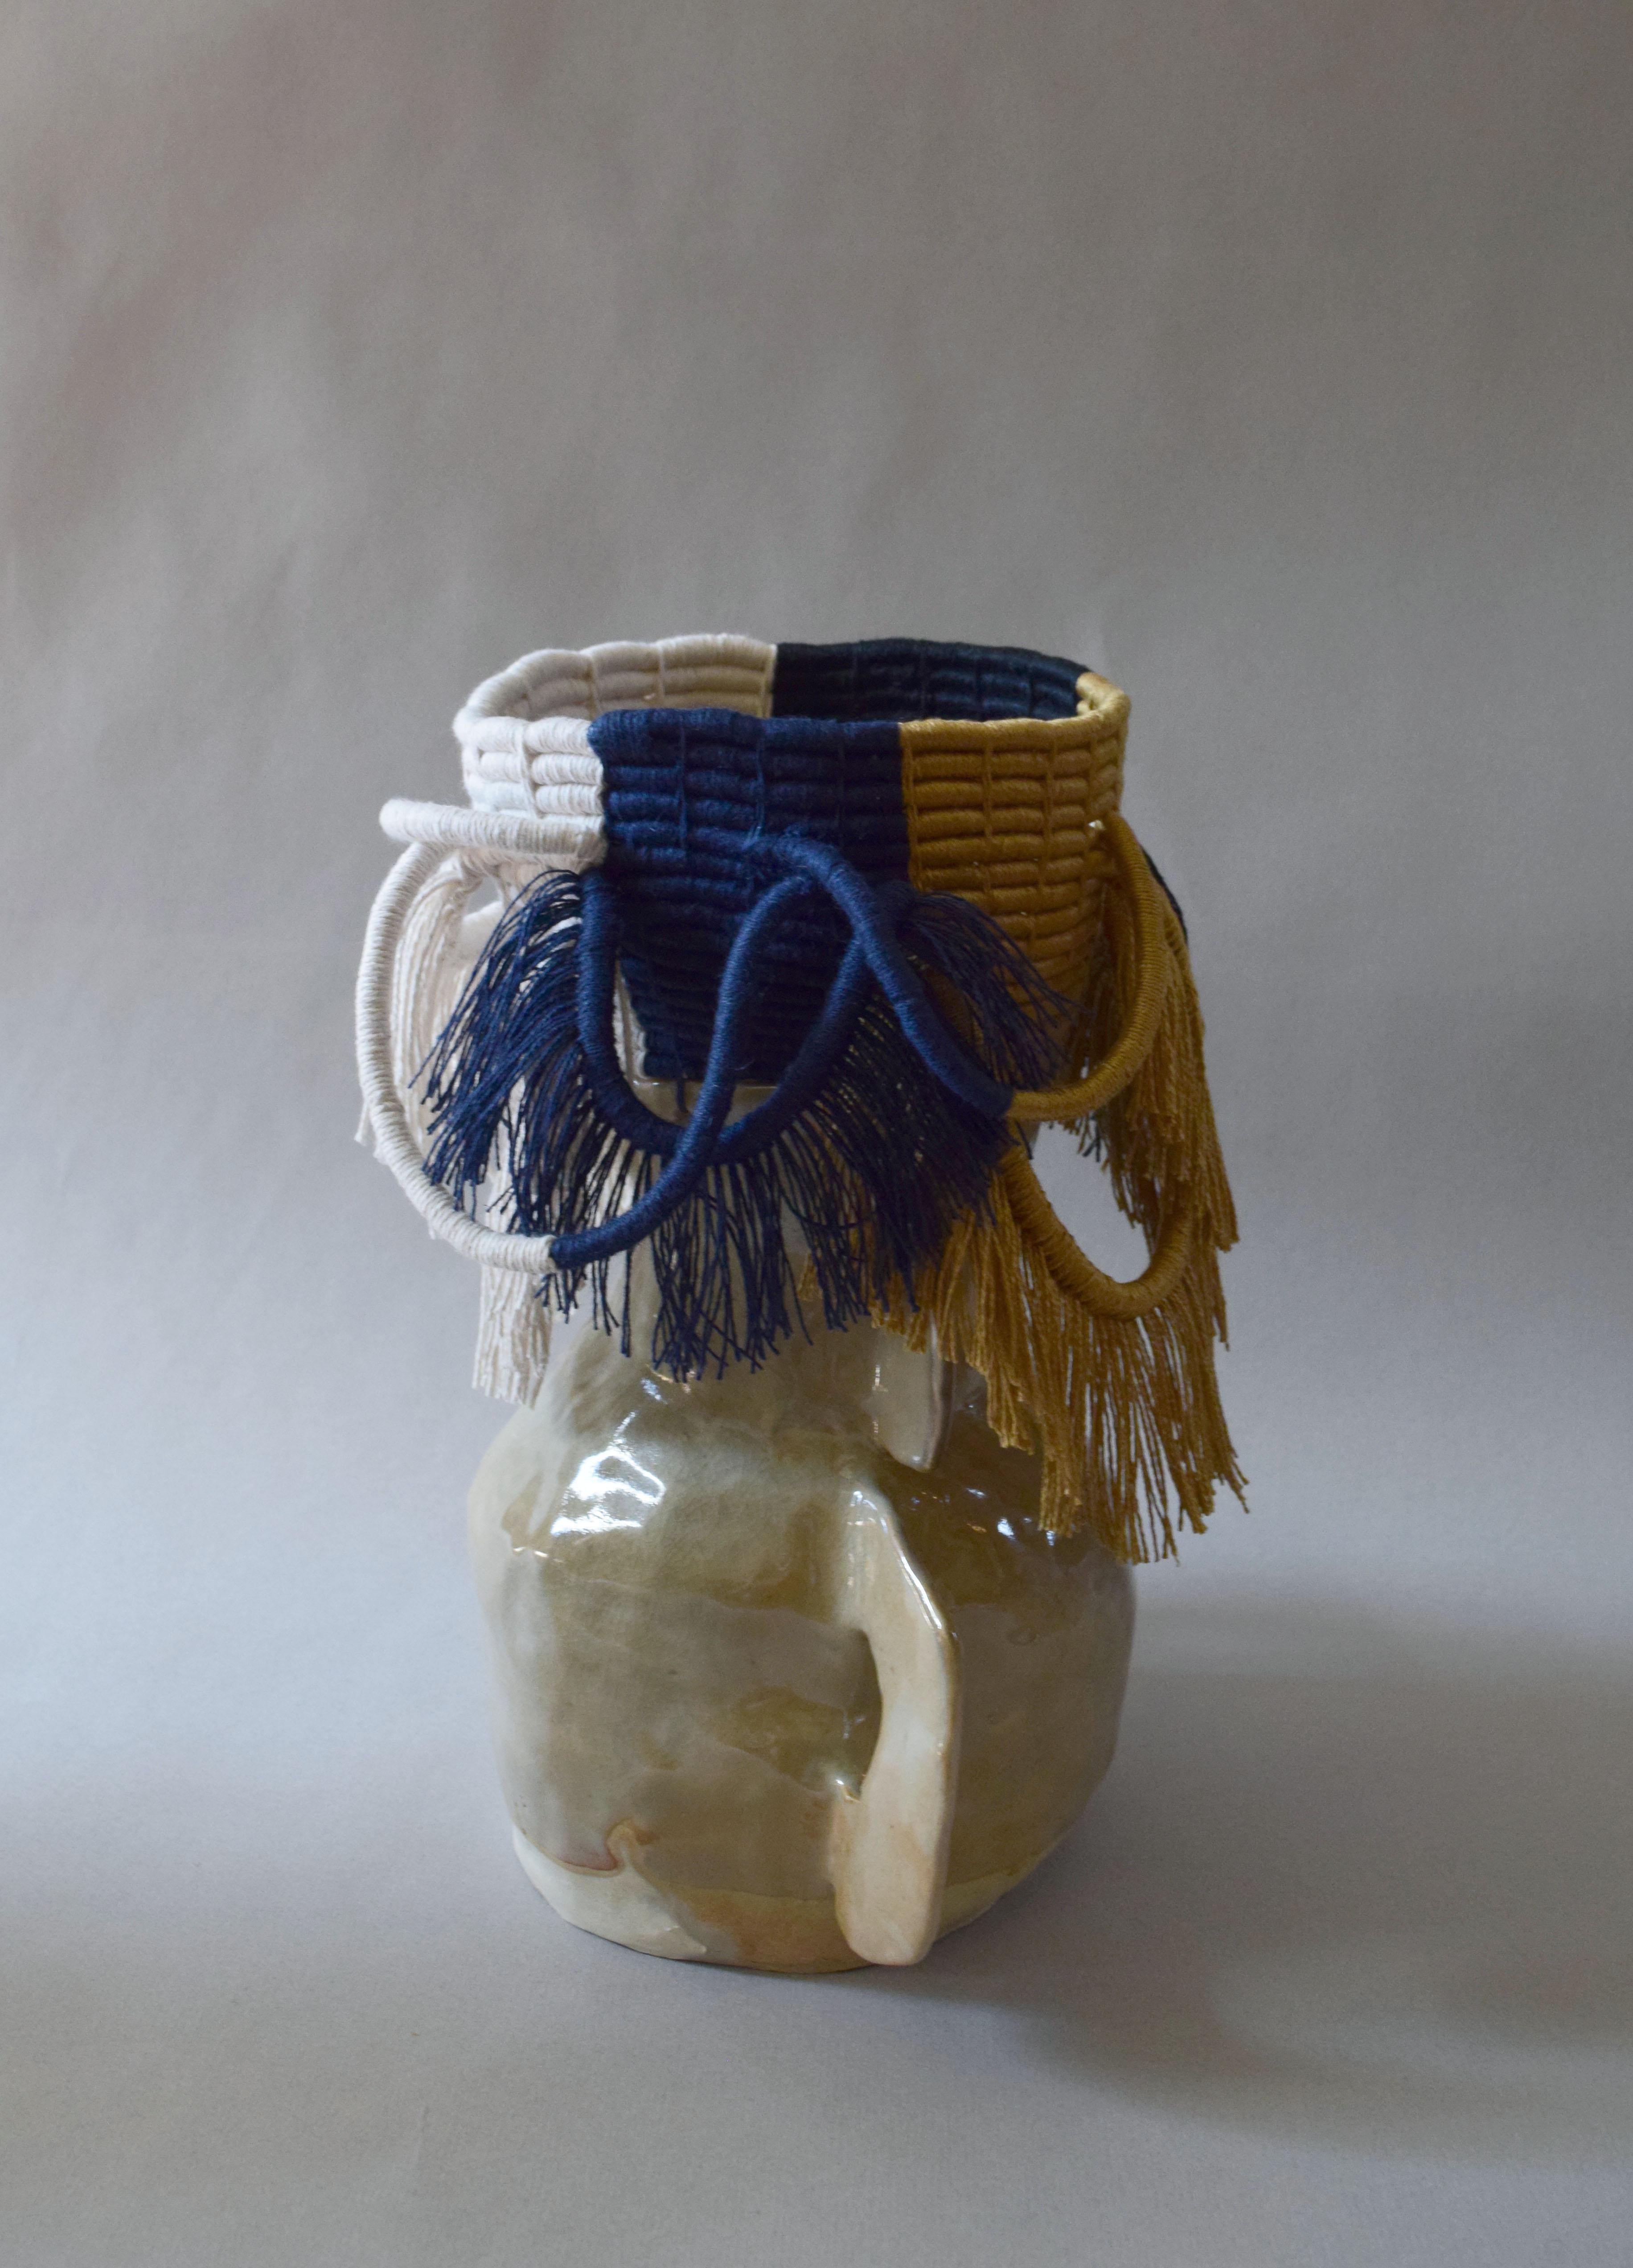 One of a Kind Ceramic and Woven Cotton Vessel in Natural, Gold, Black, Navy (Handgefertigt)